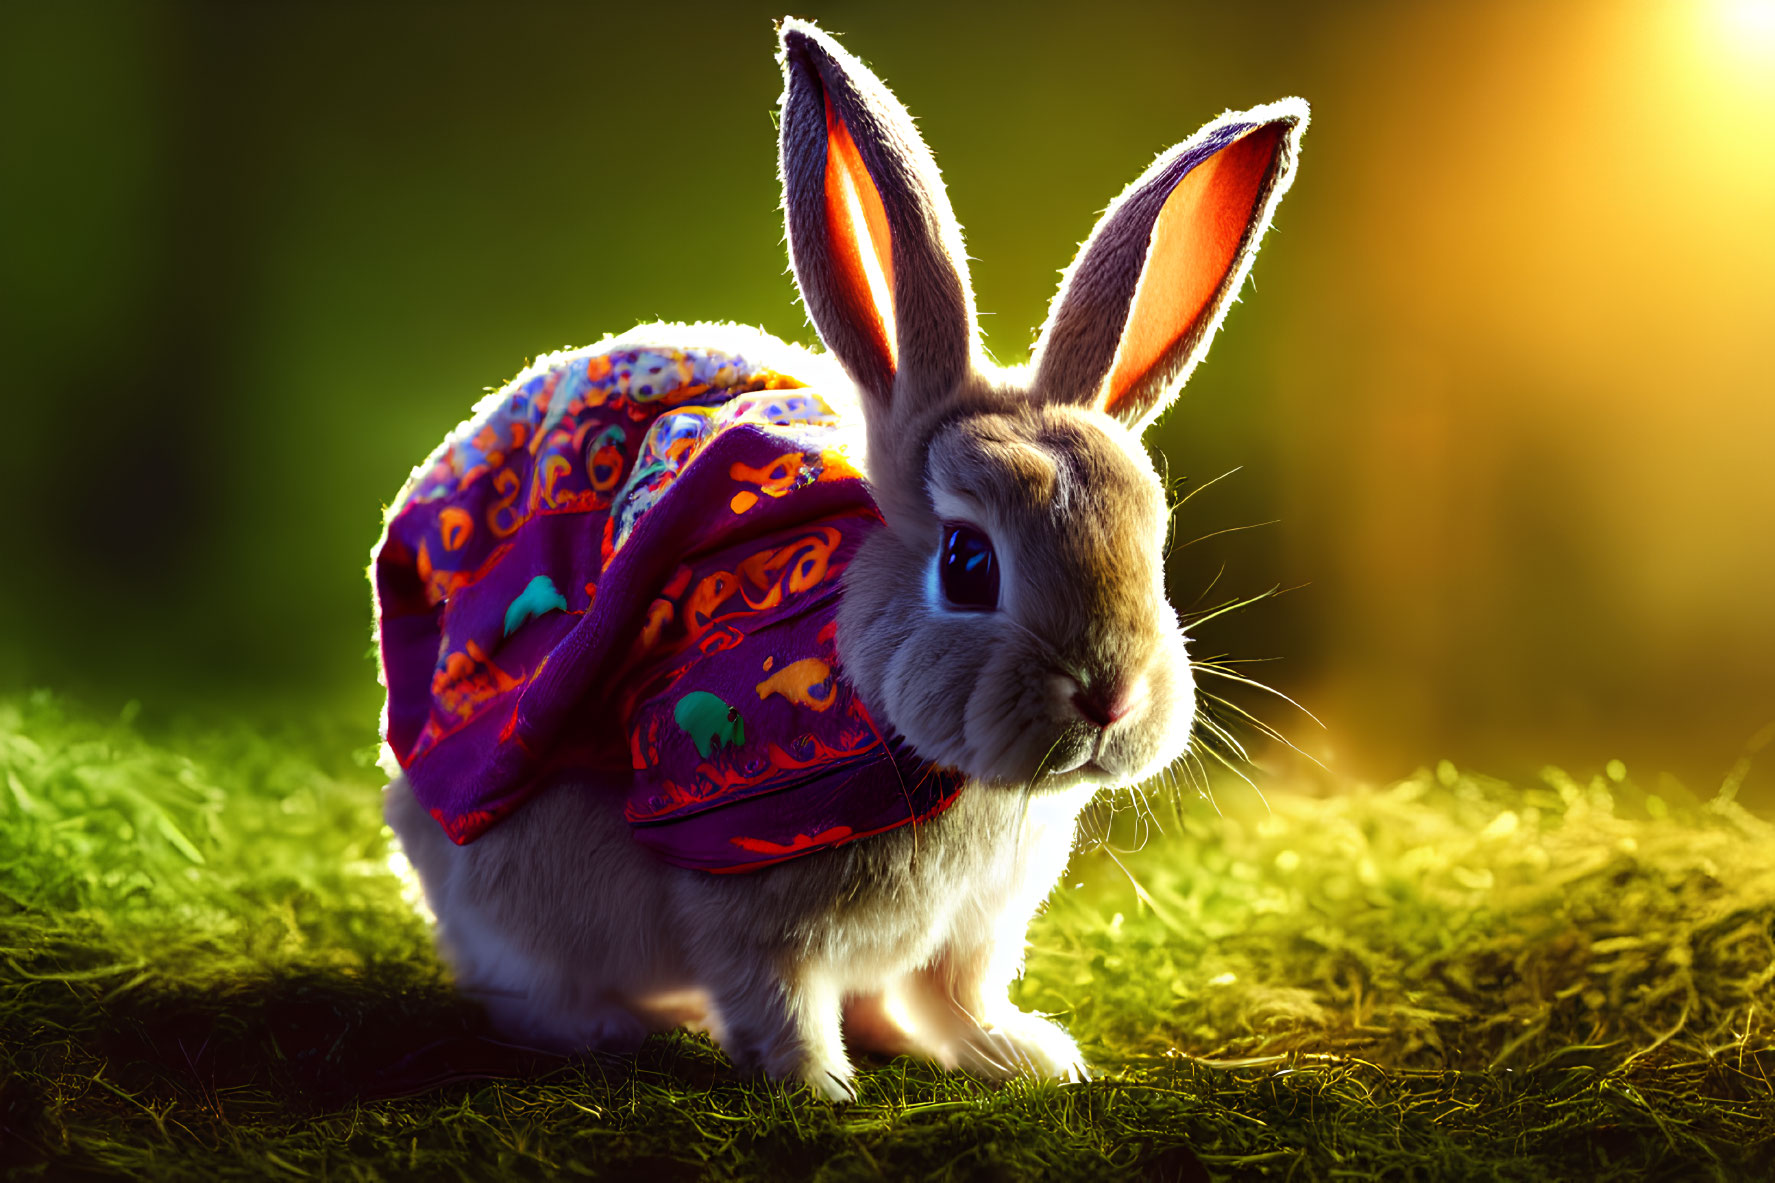 Colorful Outfit Rabbit on Grass in Sunny Background